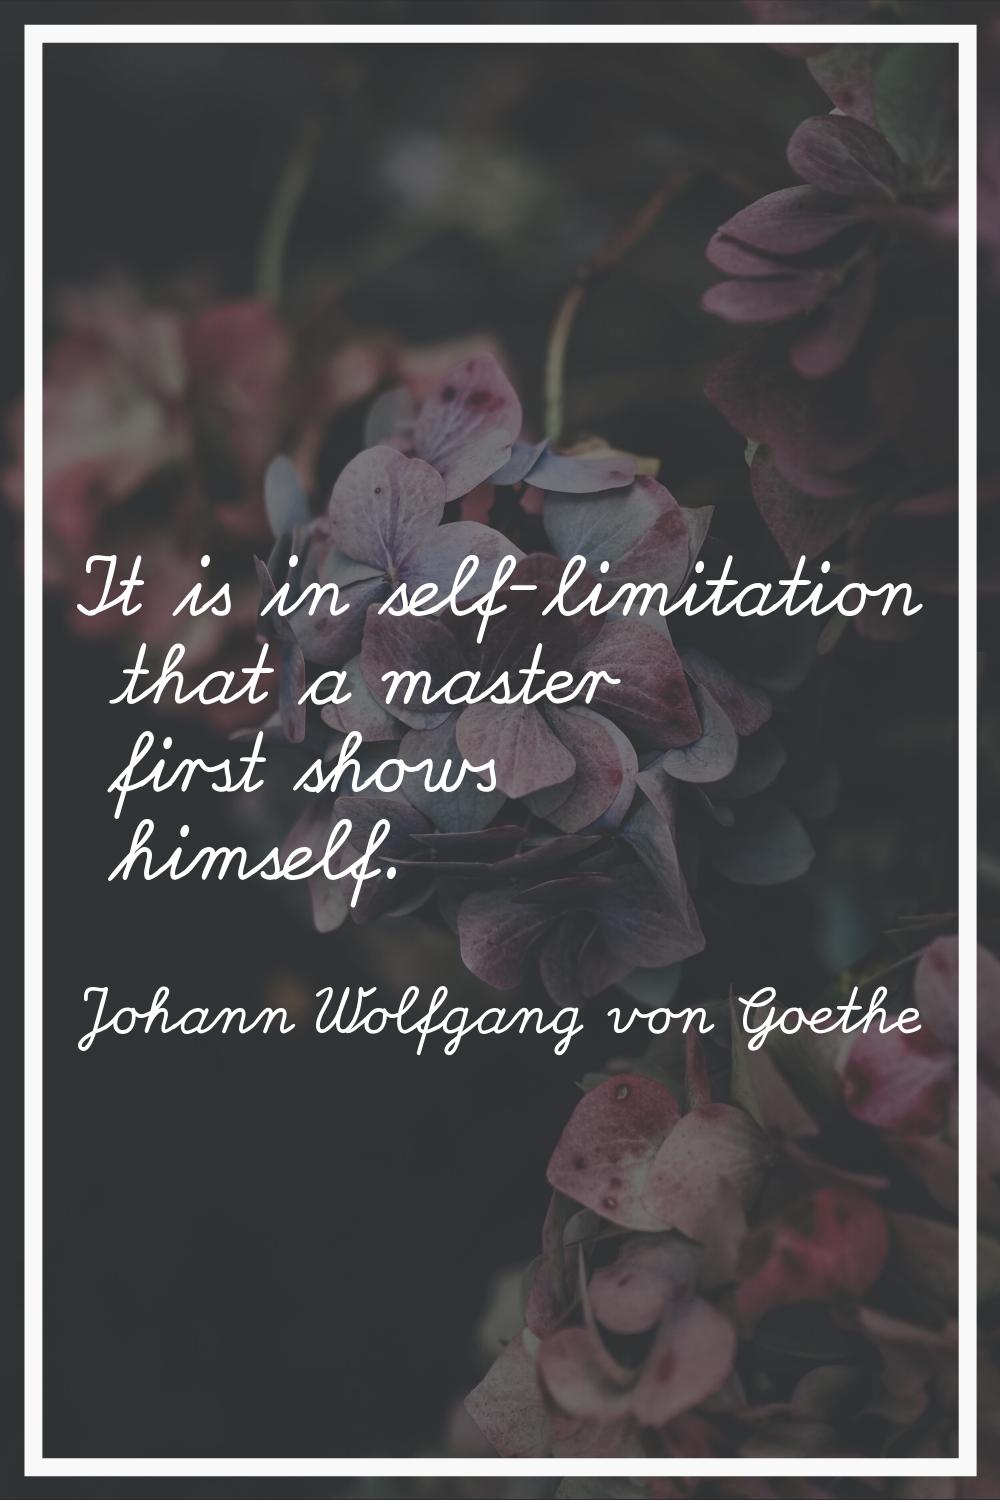 It is in self-limitation that a master first shows himself.